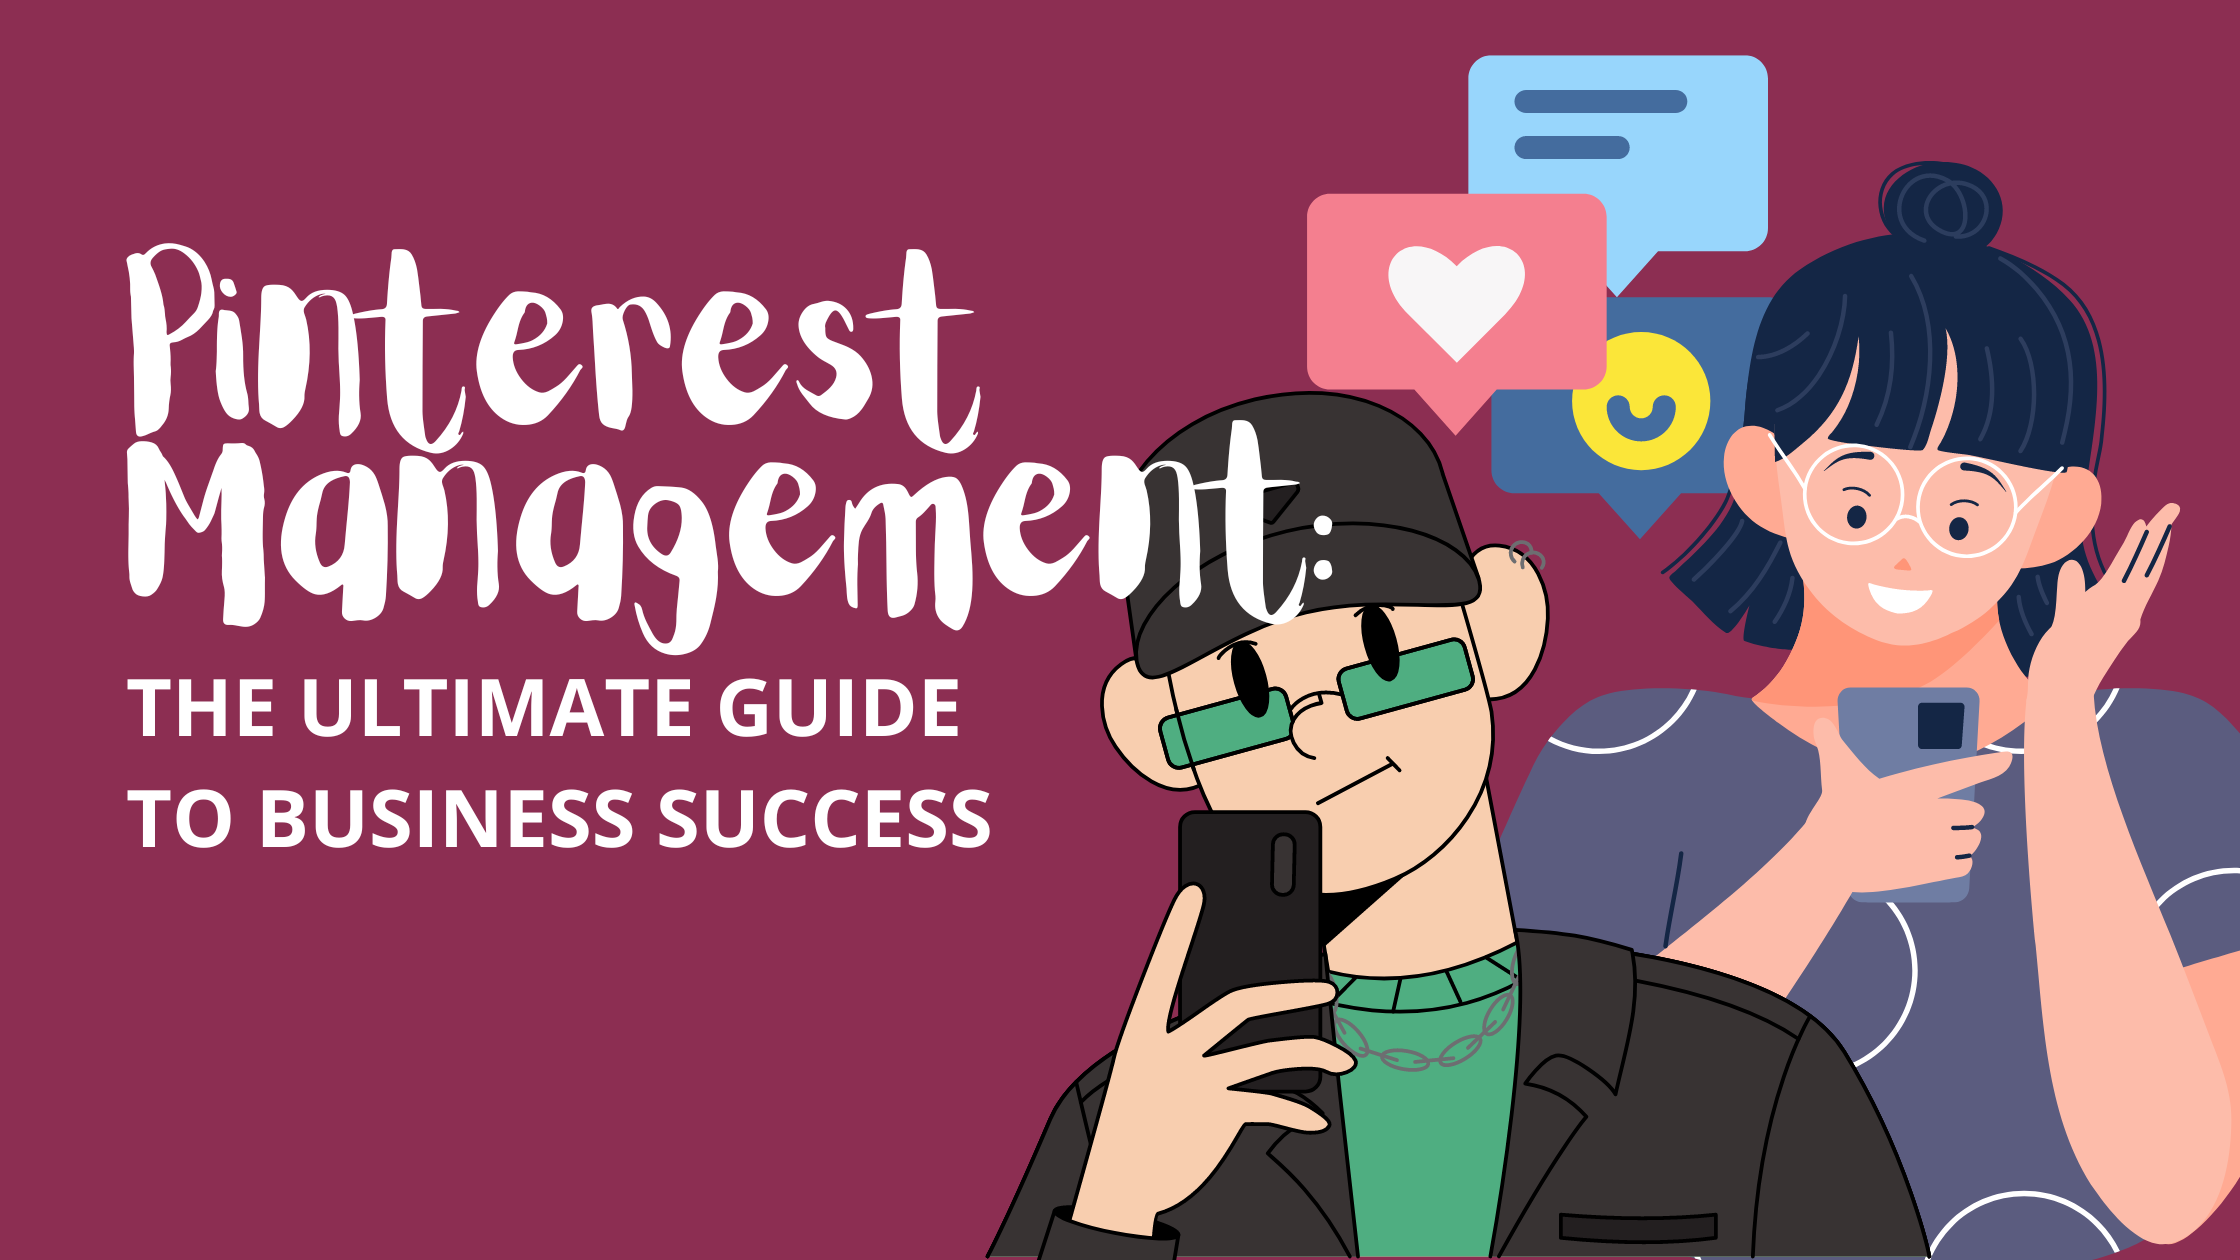 Pinterest Management: The Ultimate Guide to Business Success